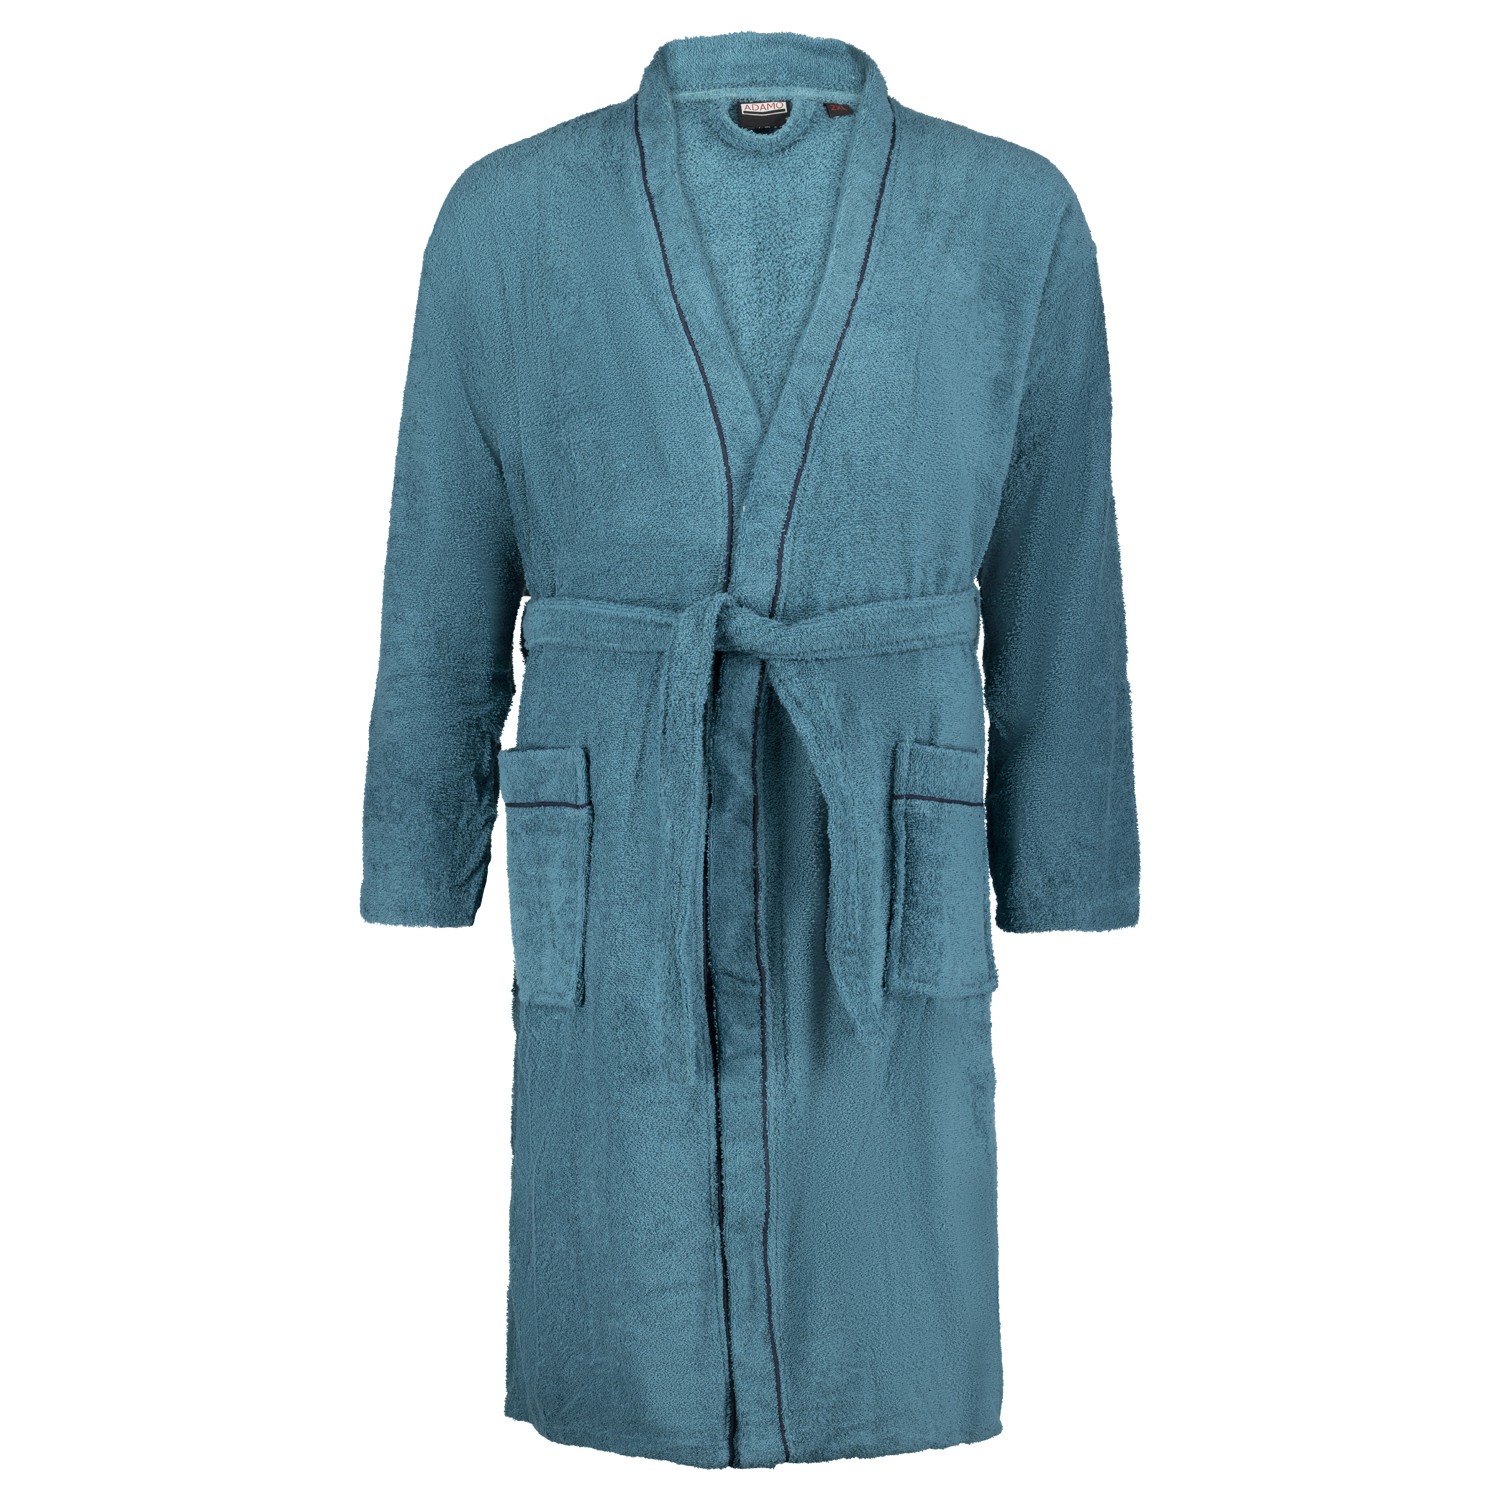 Bathrobe for men TALL FIT in petrol by ADAMO series "Jago" in oversizes up to 5XLT